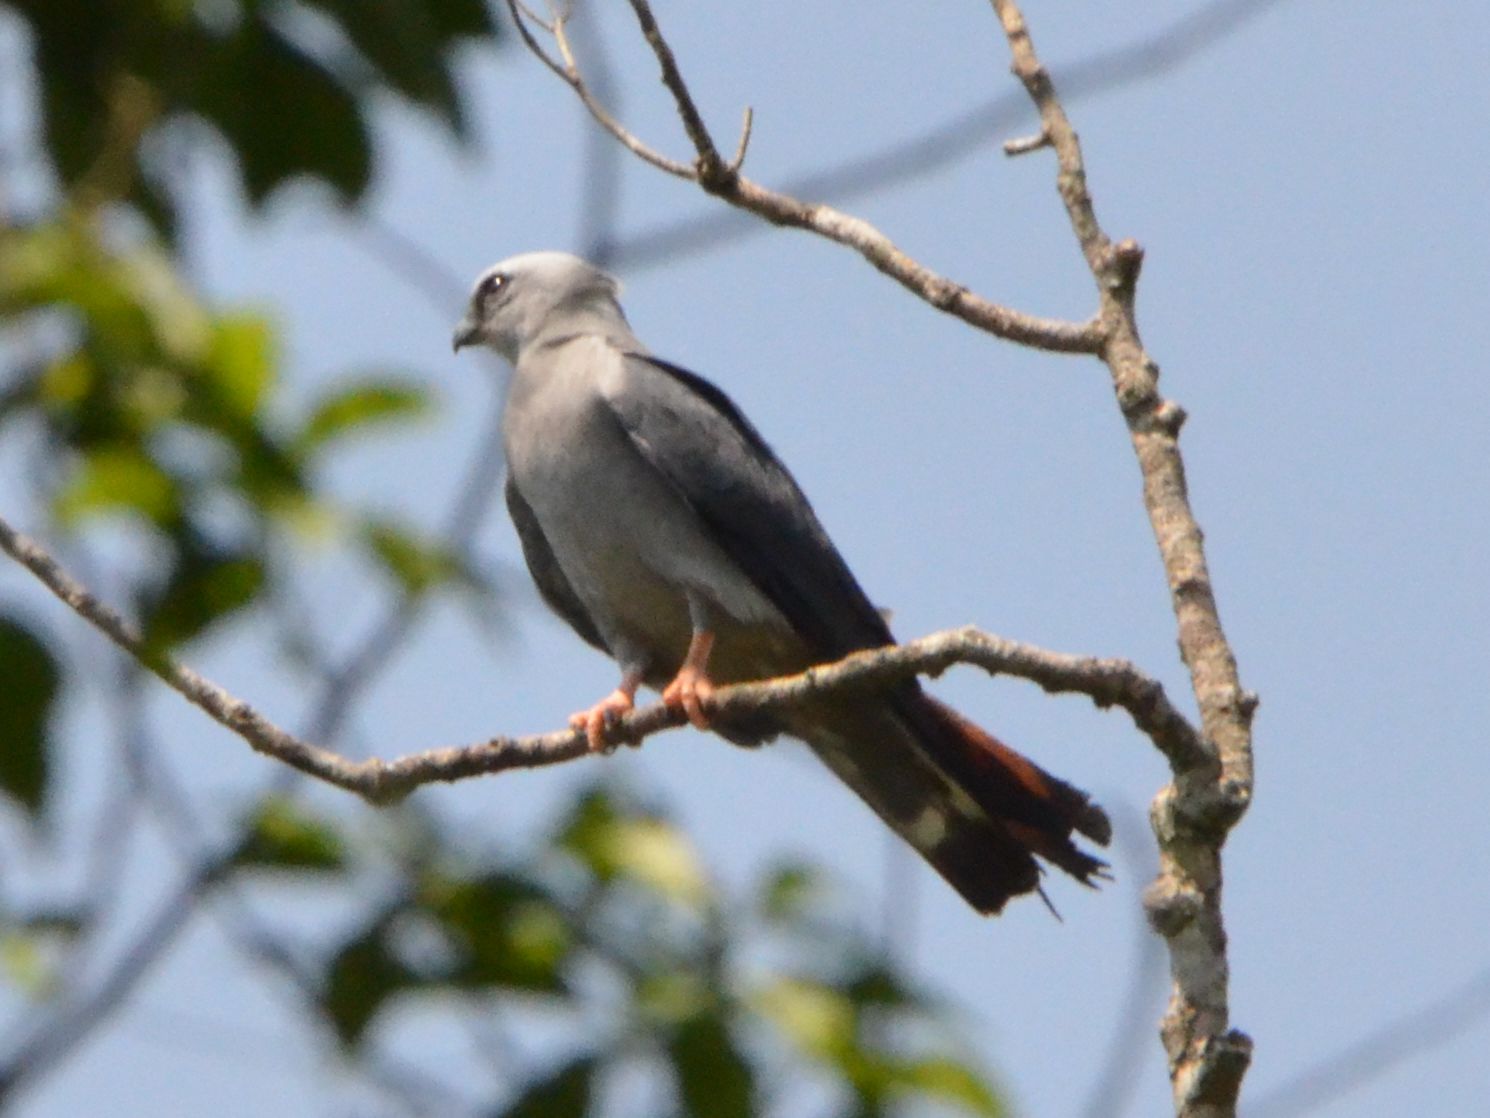 Click picture to see more Plumbeous Kites.